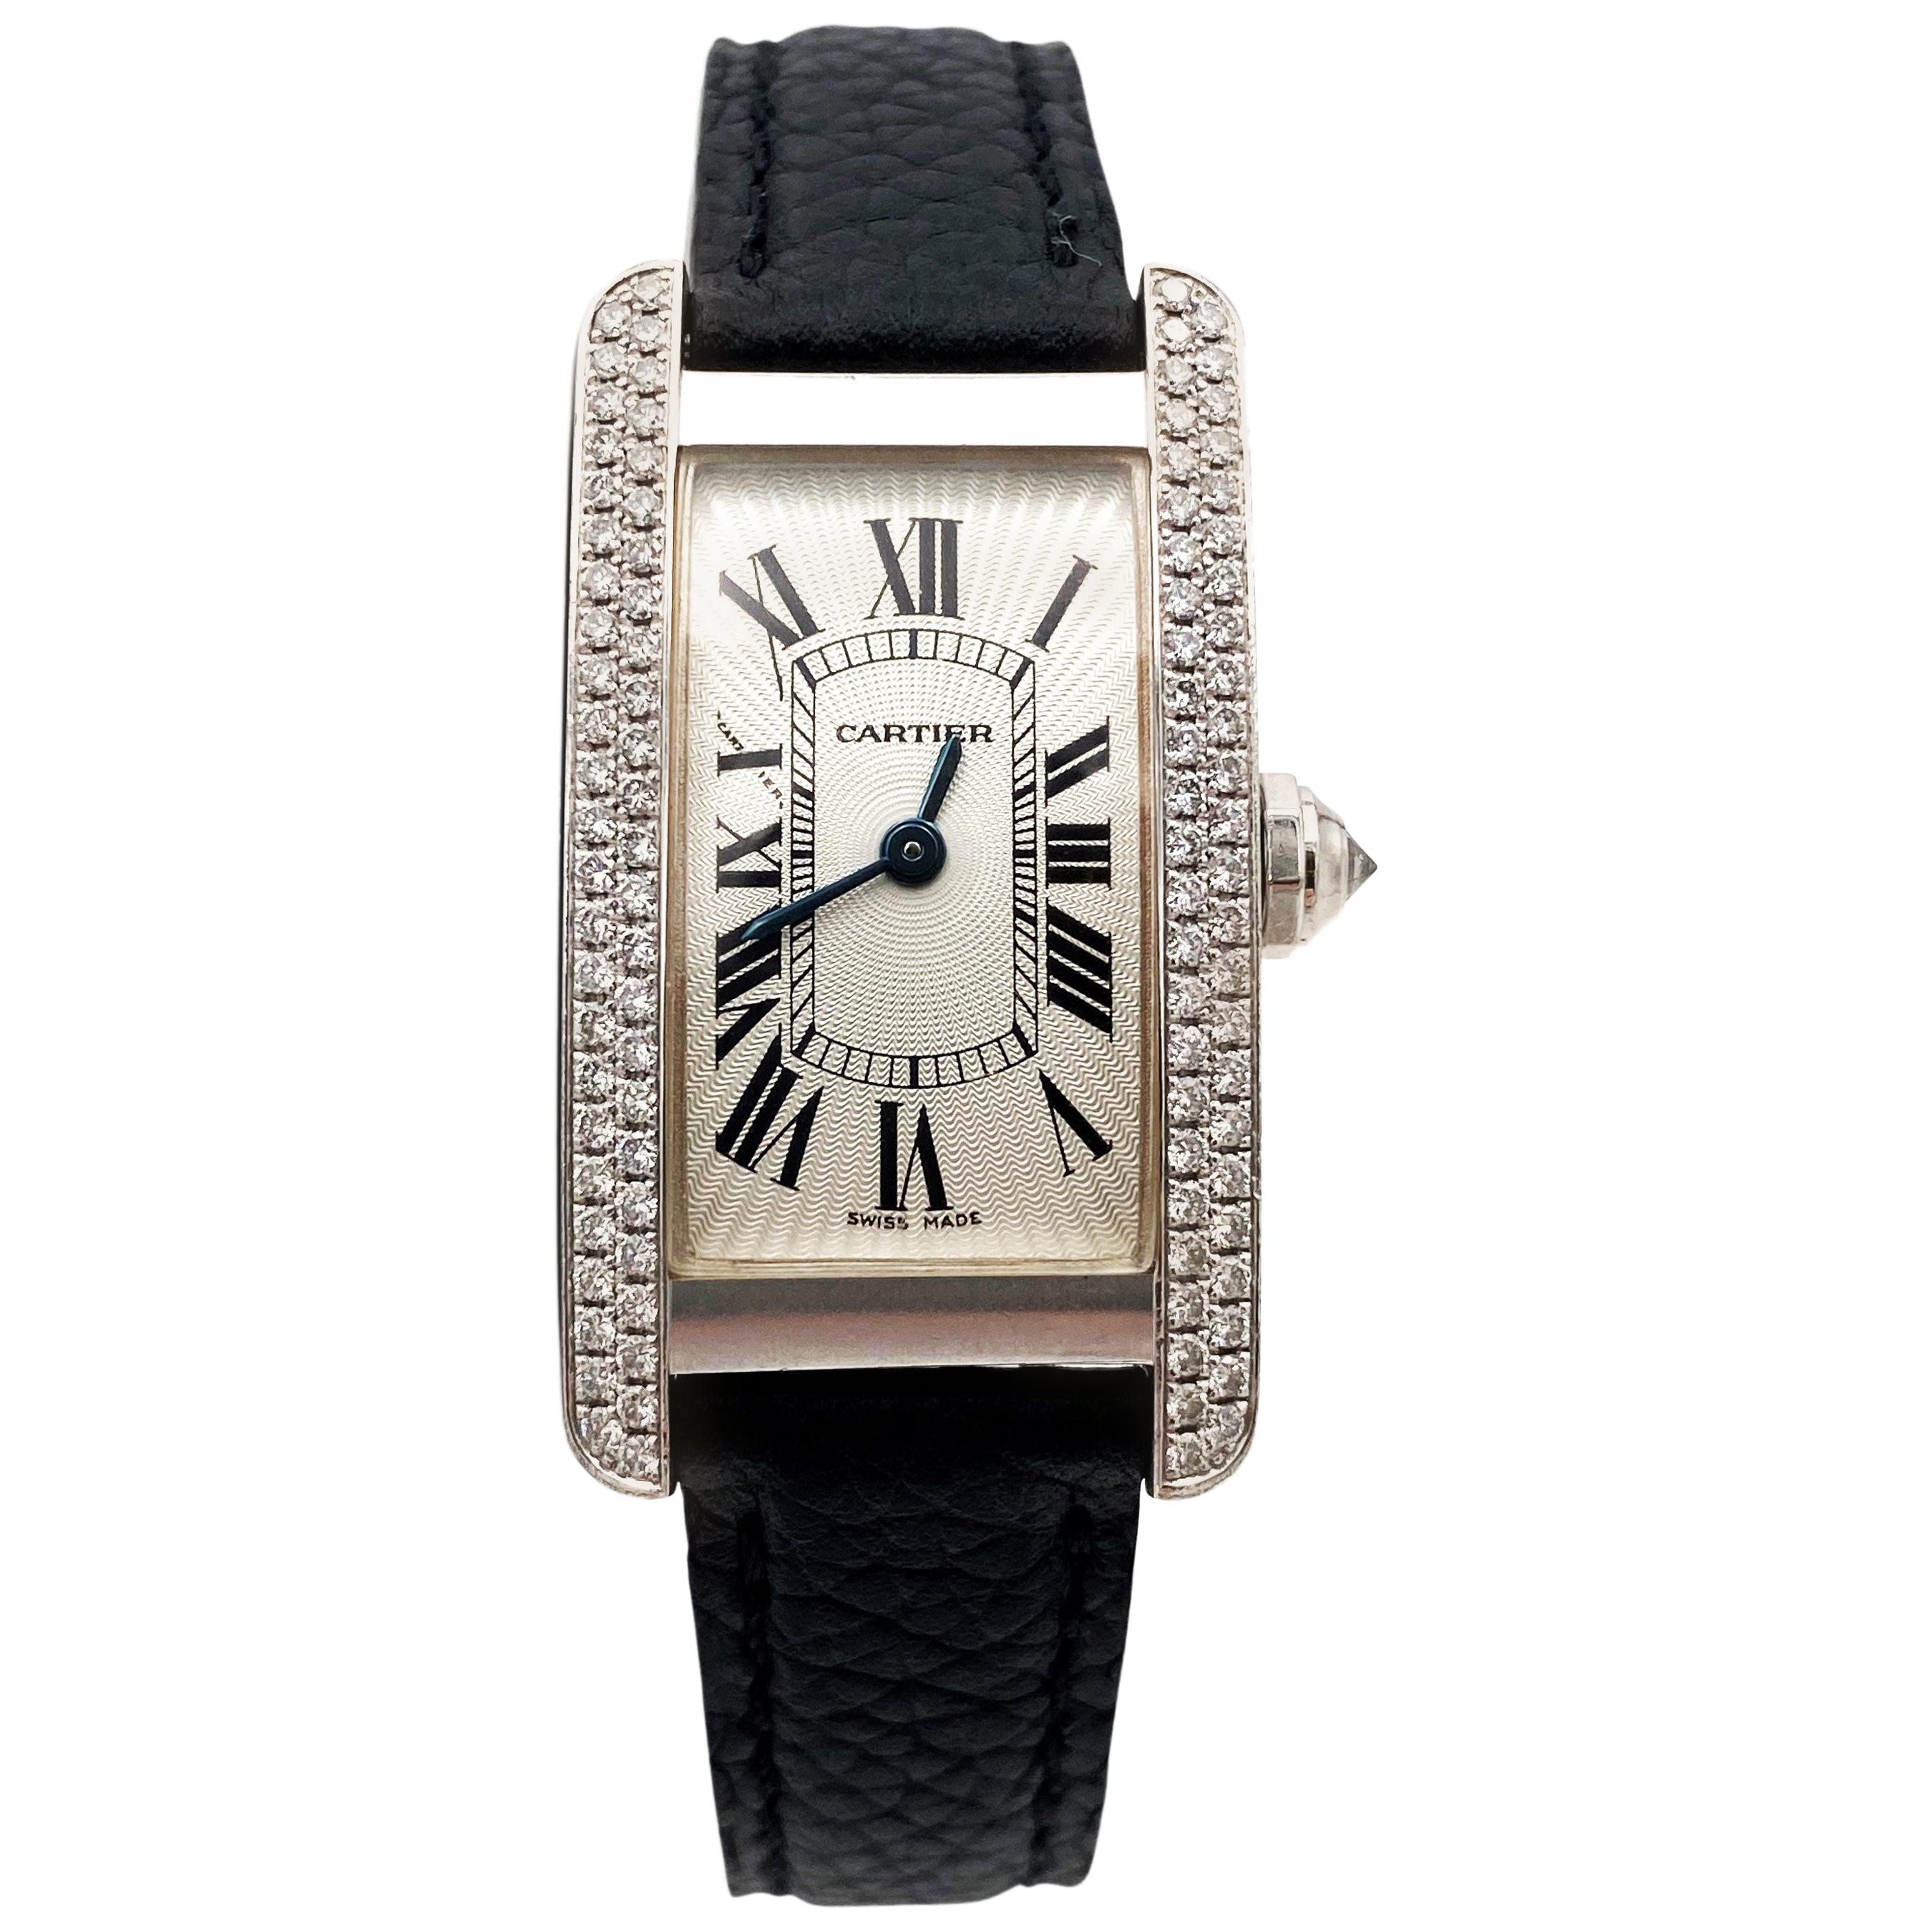 cartier americaine white gold